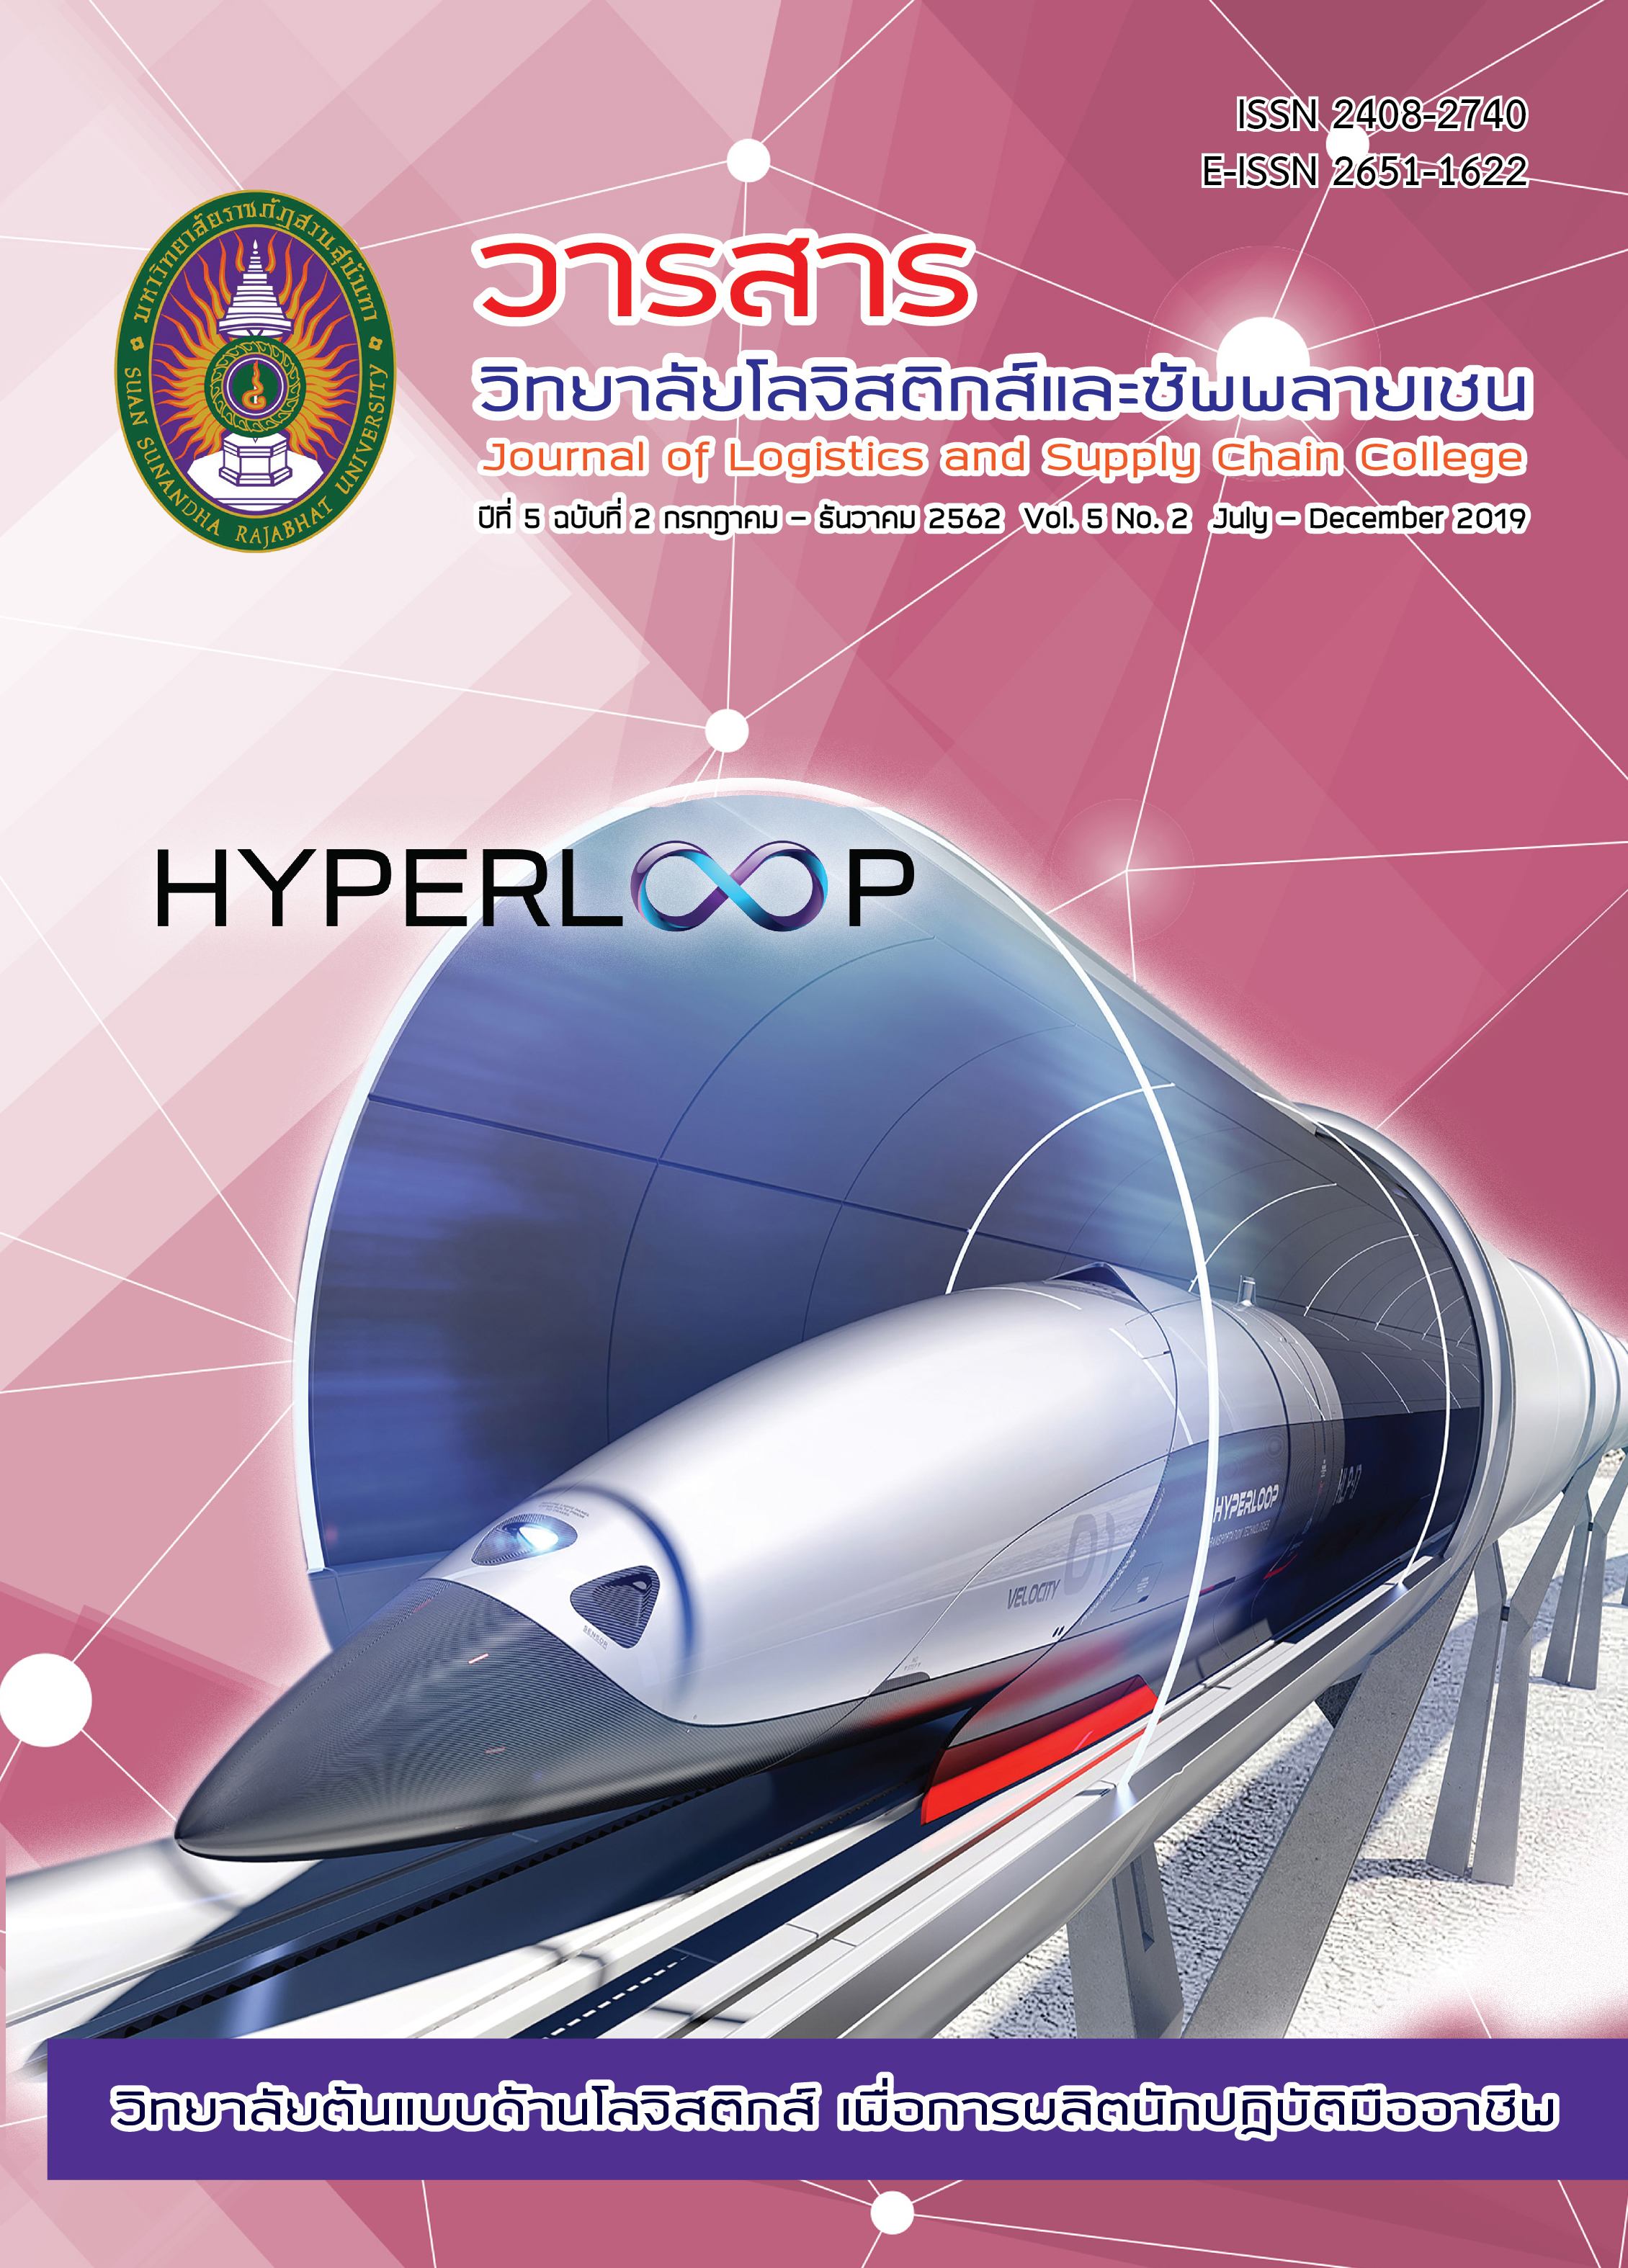 					View Vol. 5 No. 2 กรกฎาคม-ธันวาคม (2019): Journal of Logistics and Supply Chain College
				